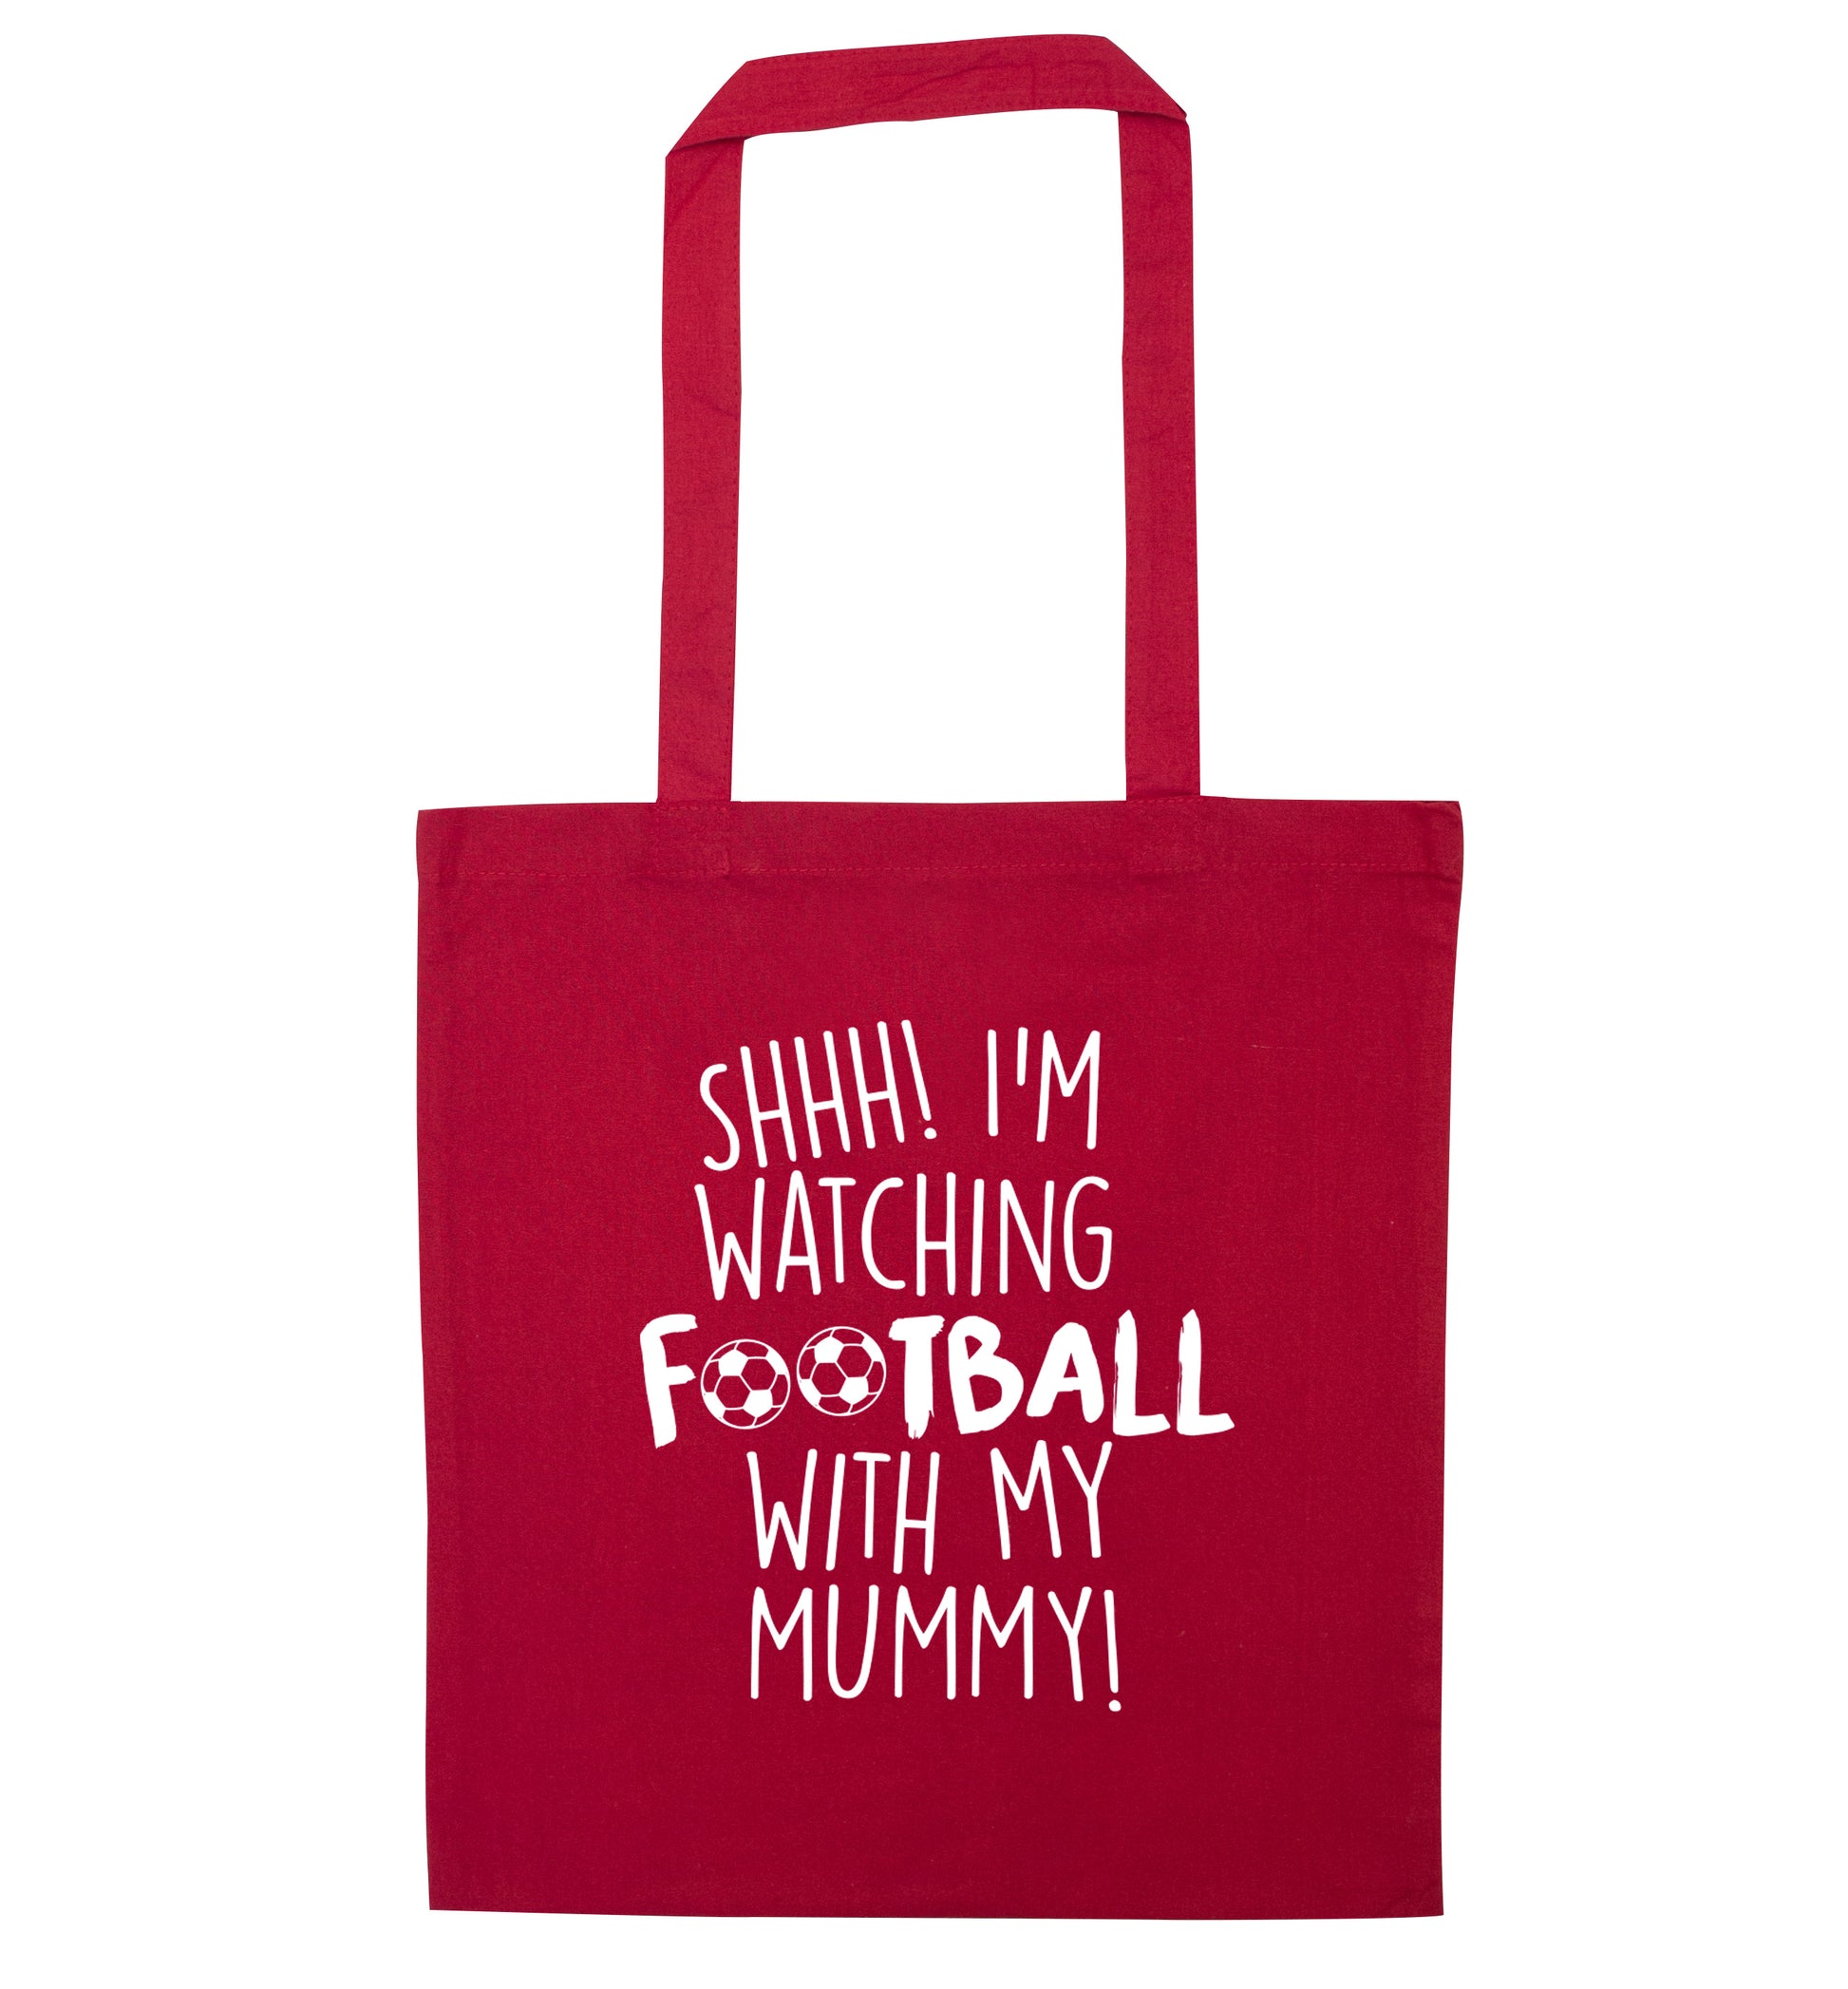 Shhh I'm watching football with my mummy red tote bag